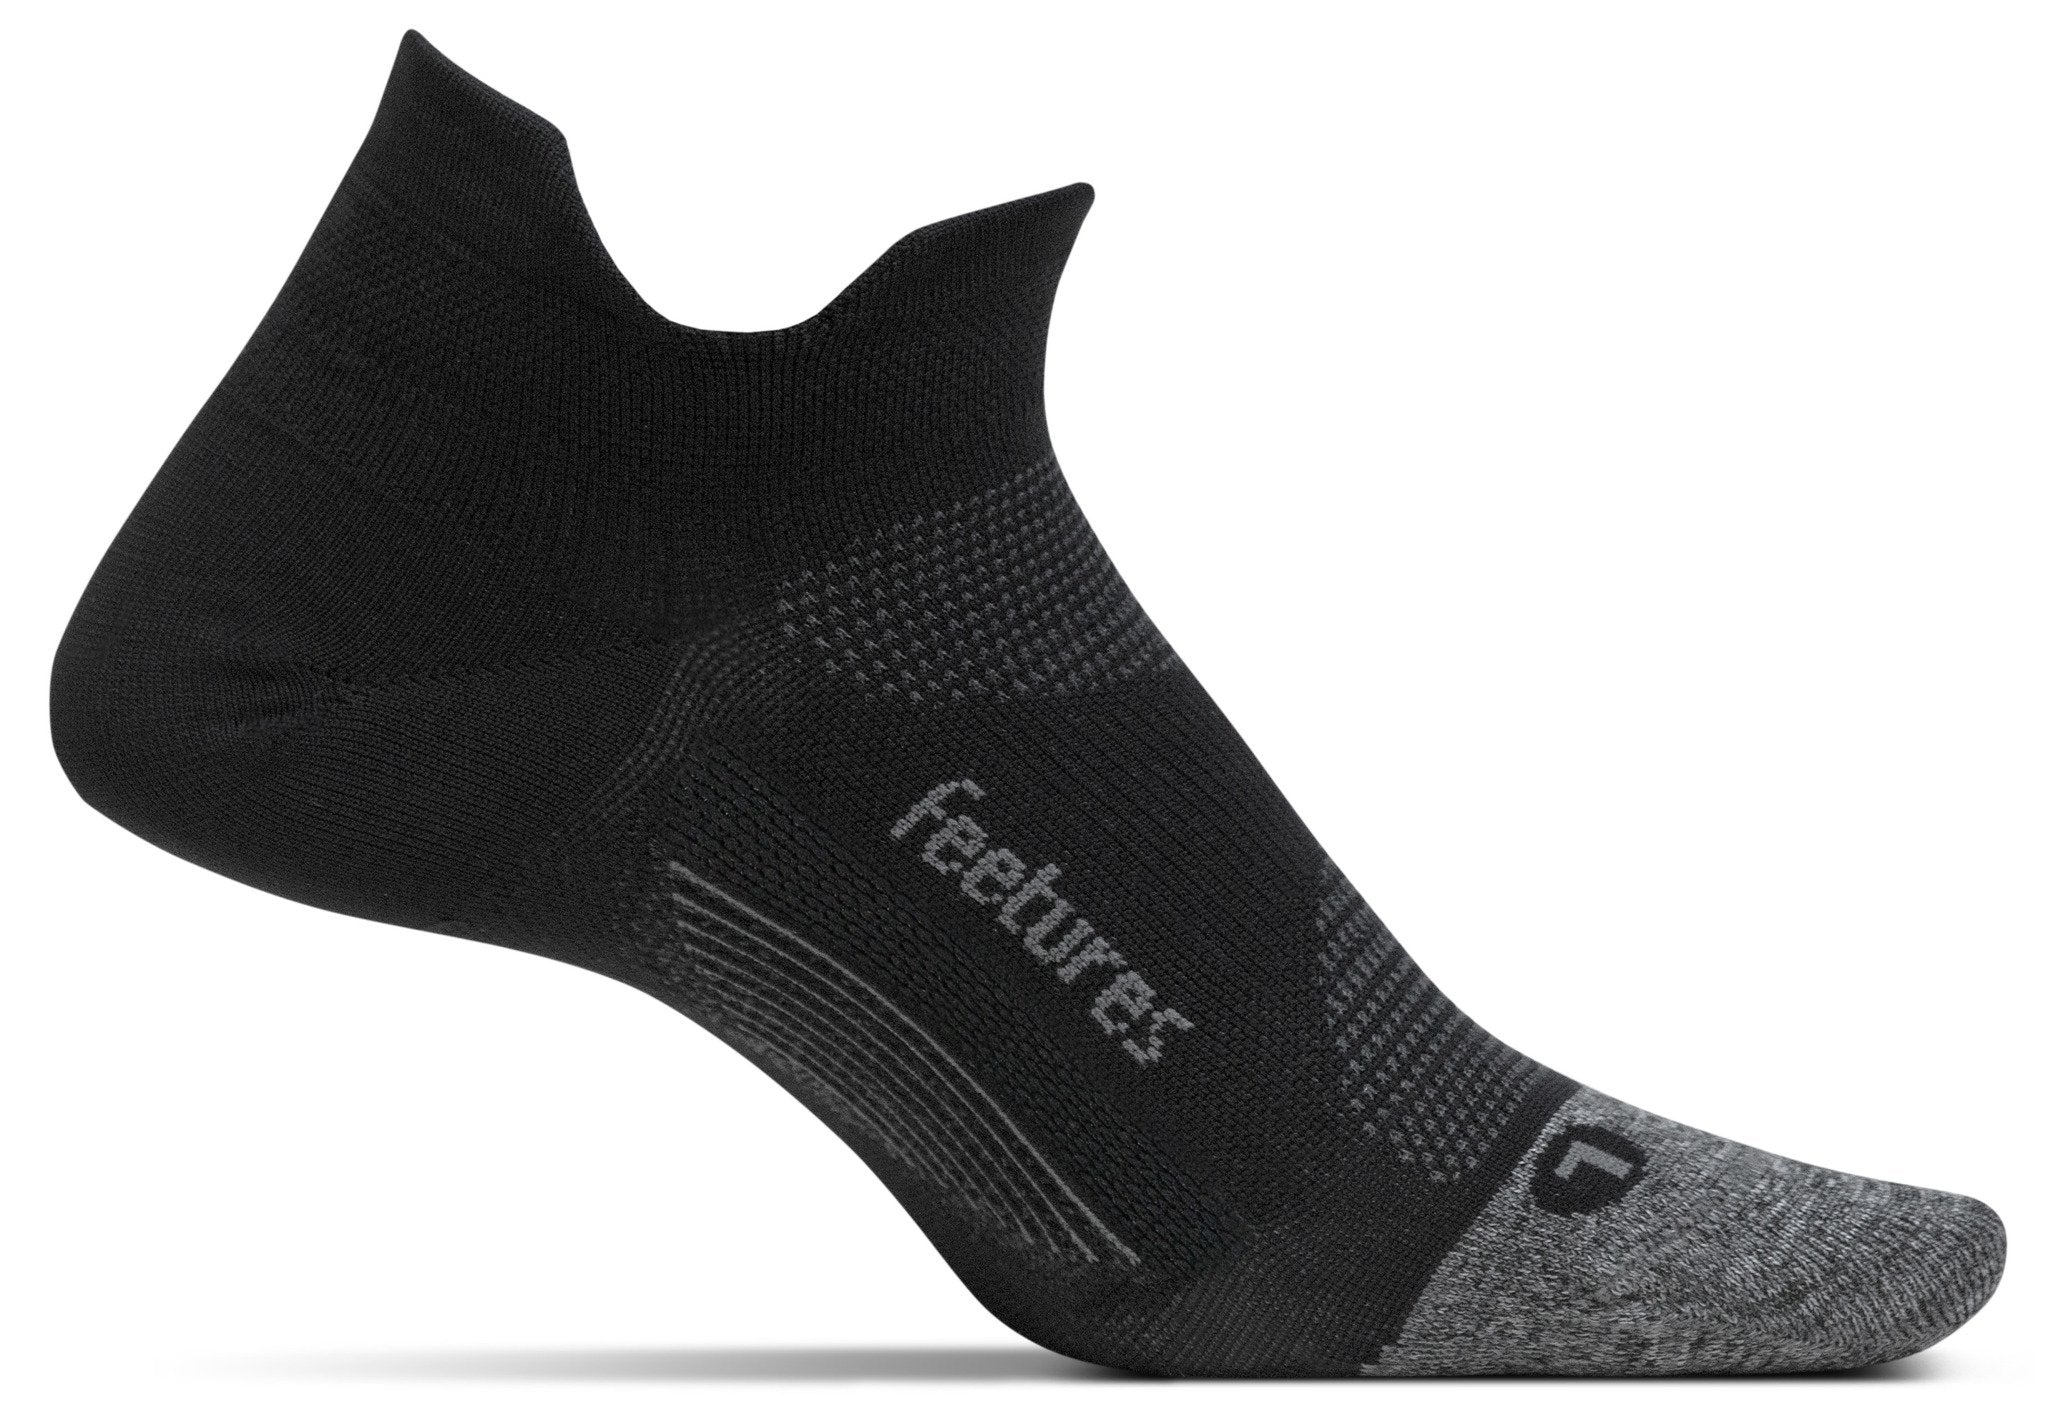 A medial view of the Feetures Elite Light Cushion running sock (left foot) in the color black.